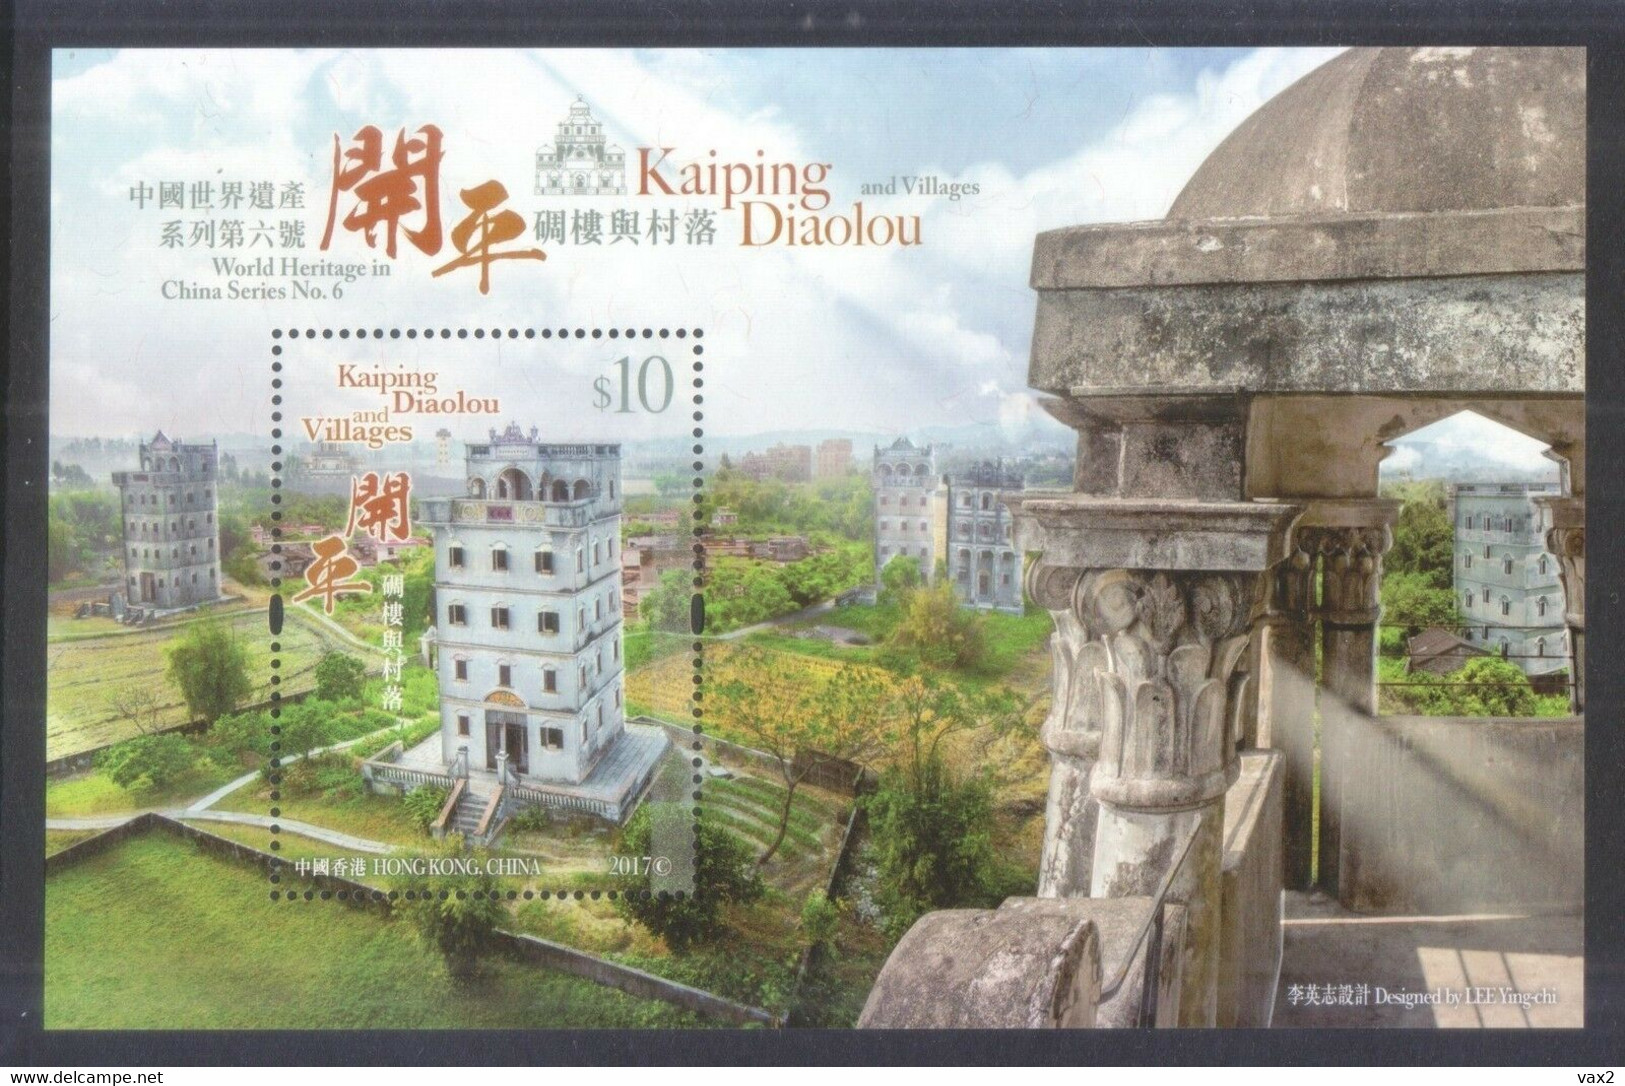 Hong Kong 2017 S#1835 World Heritage In China Series No. 6: Kaiping Diaolou & Villages M/S MNH UNESCO Unusual (embossed) - Nuevos